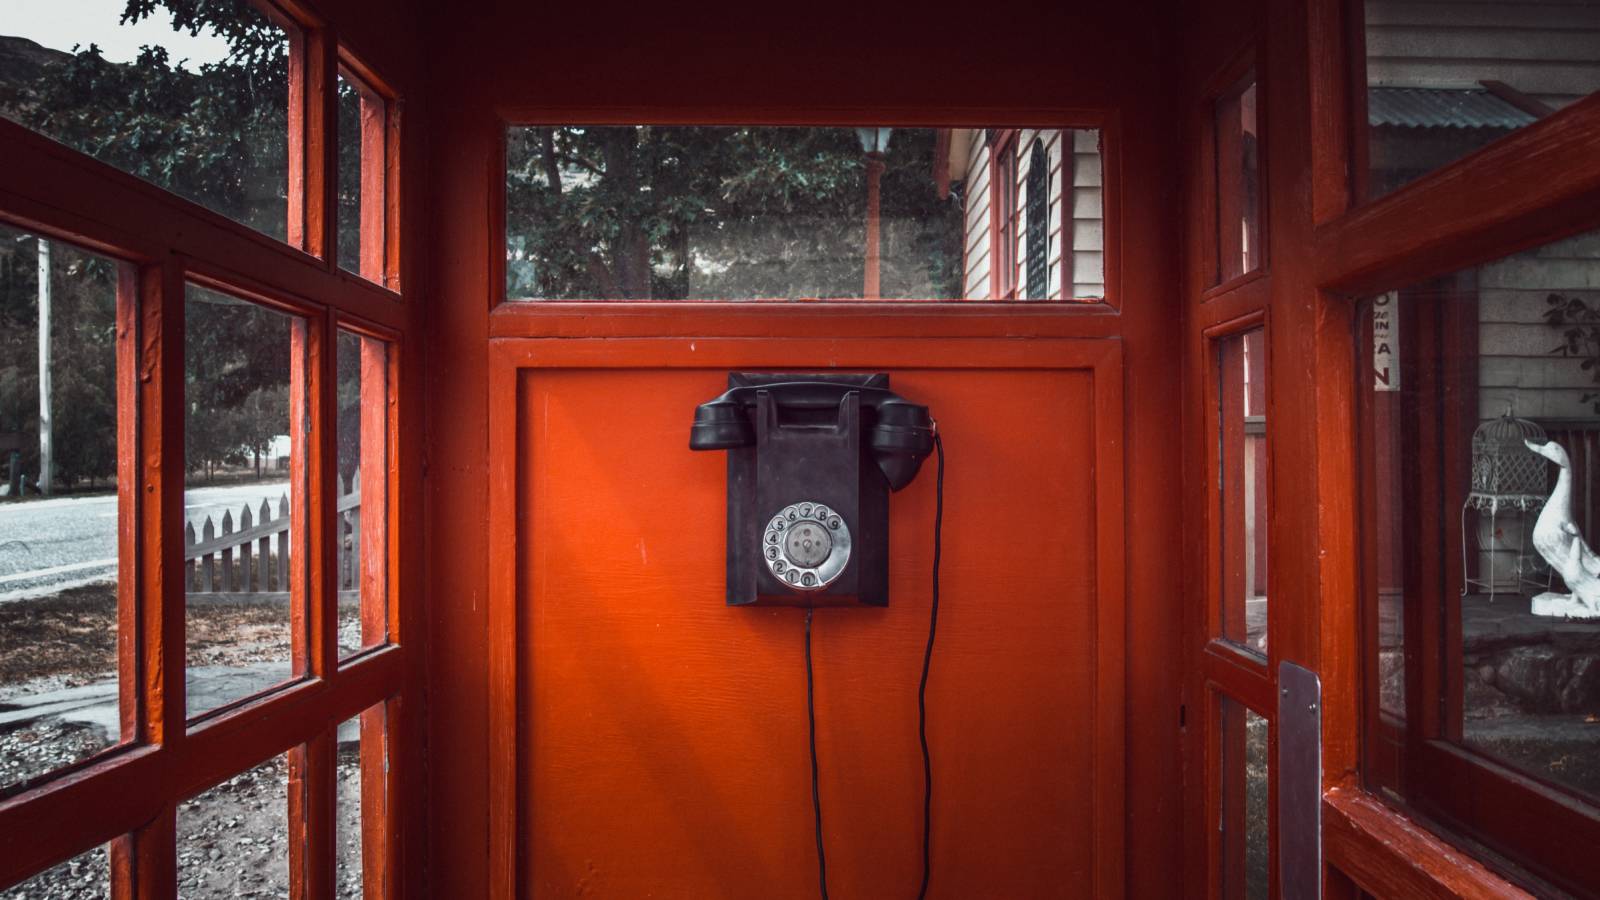 Telephone booth with black pick up phone